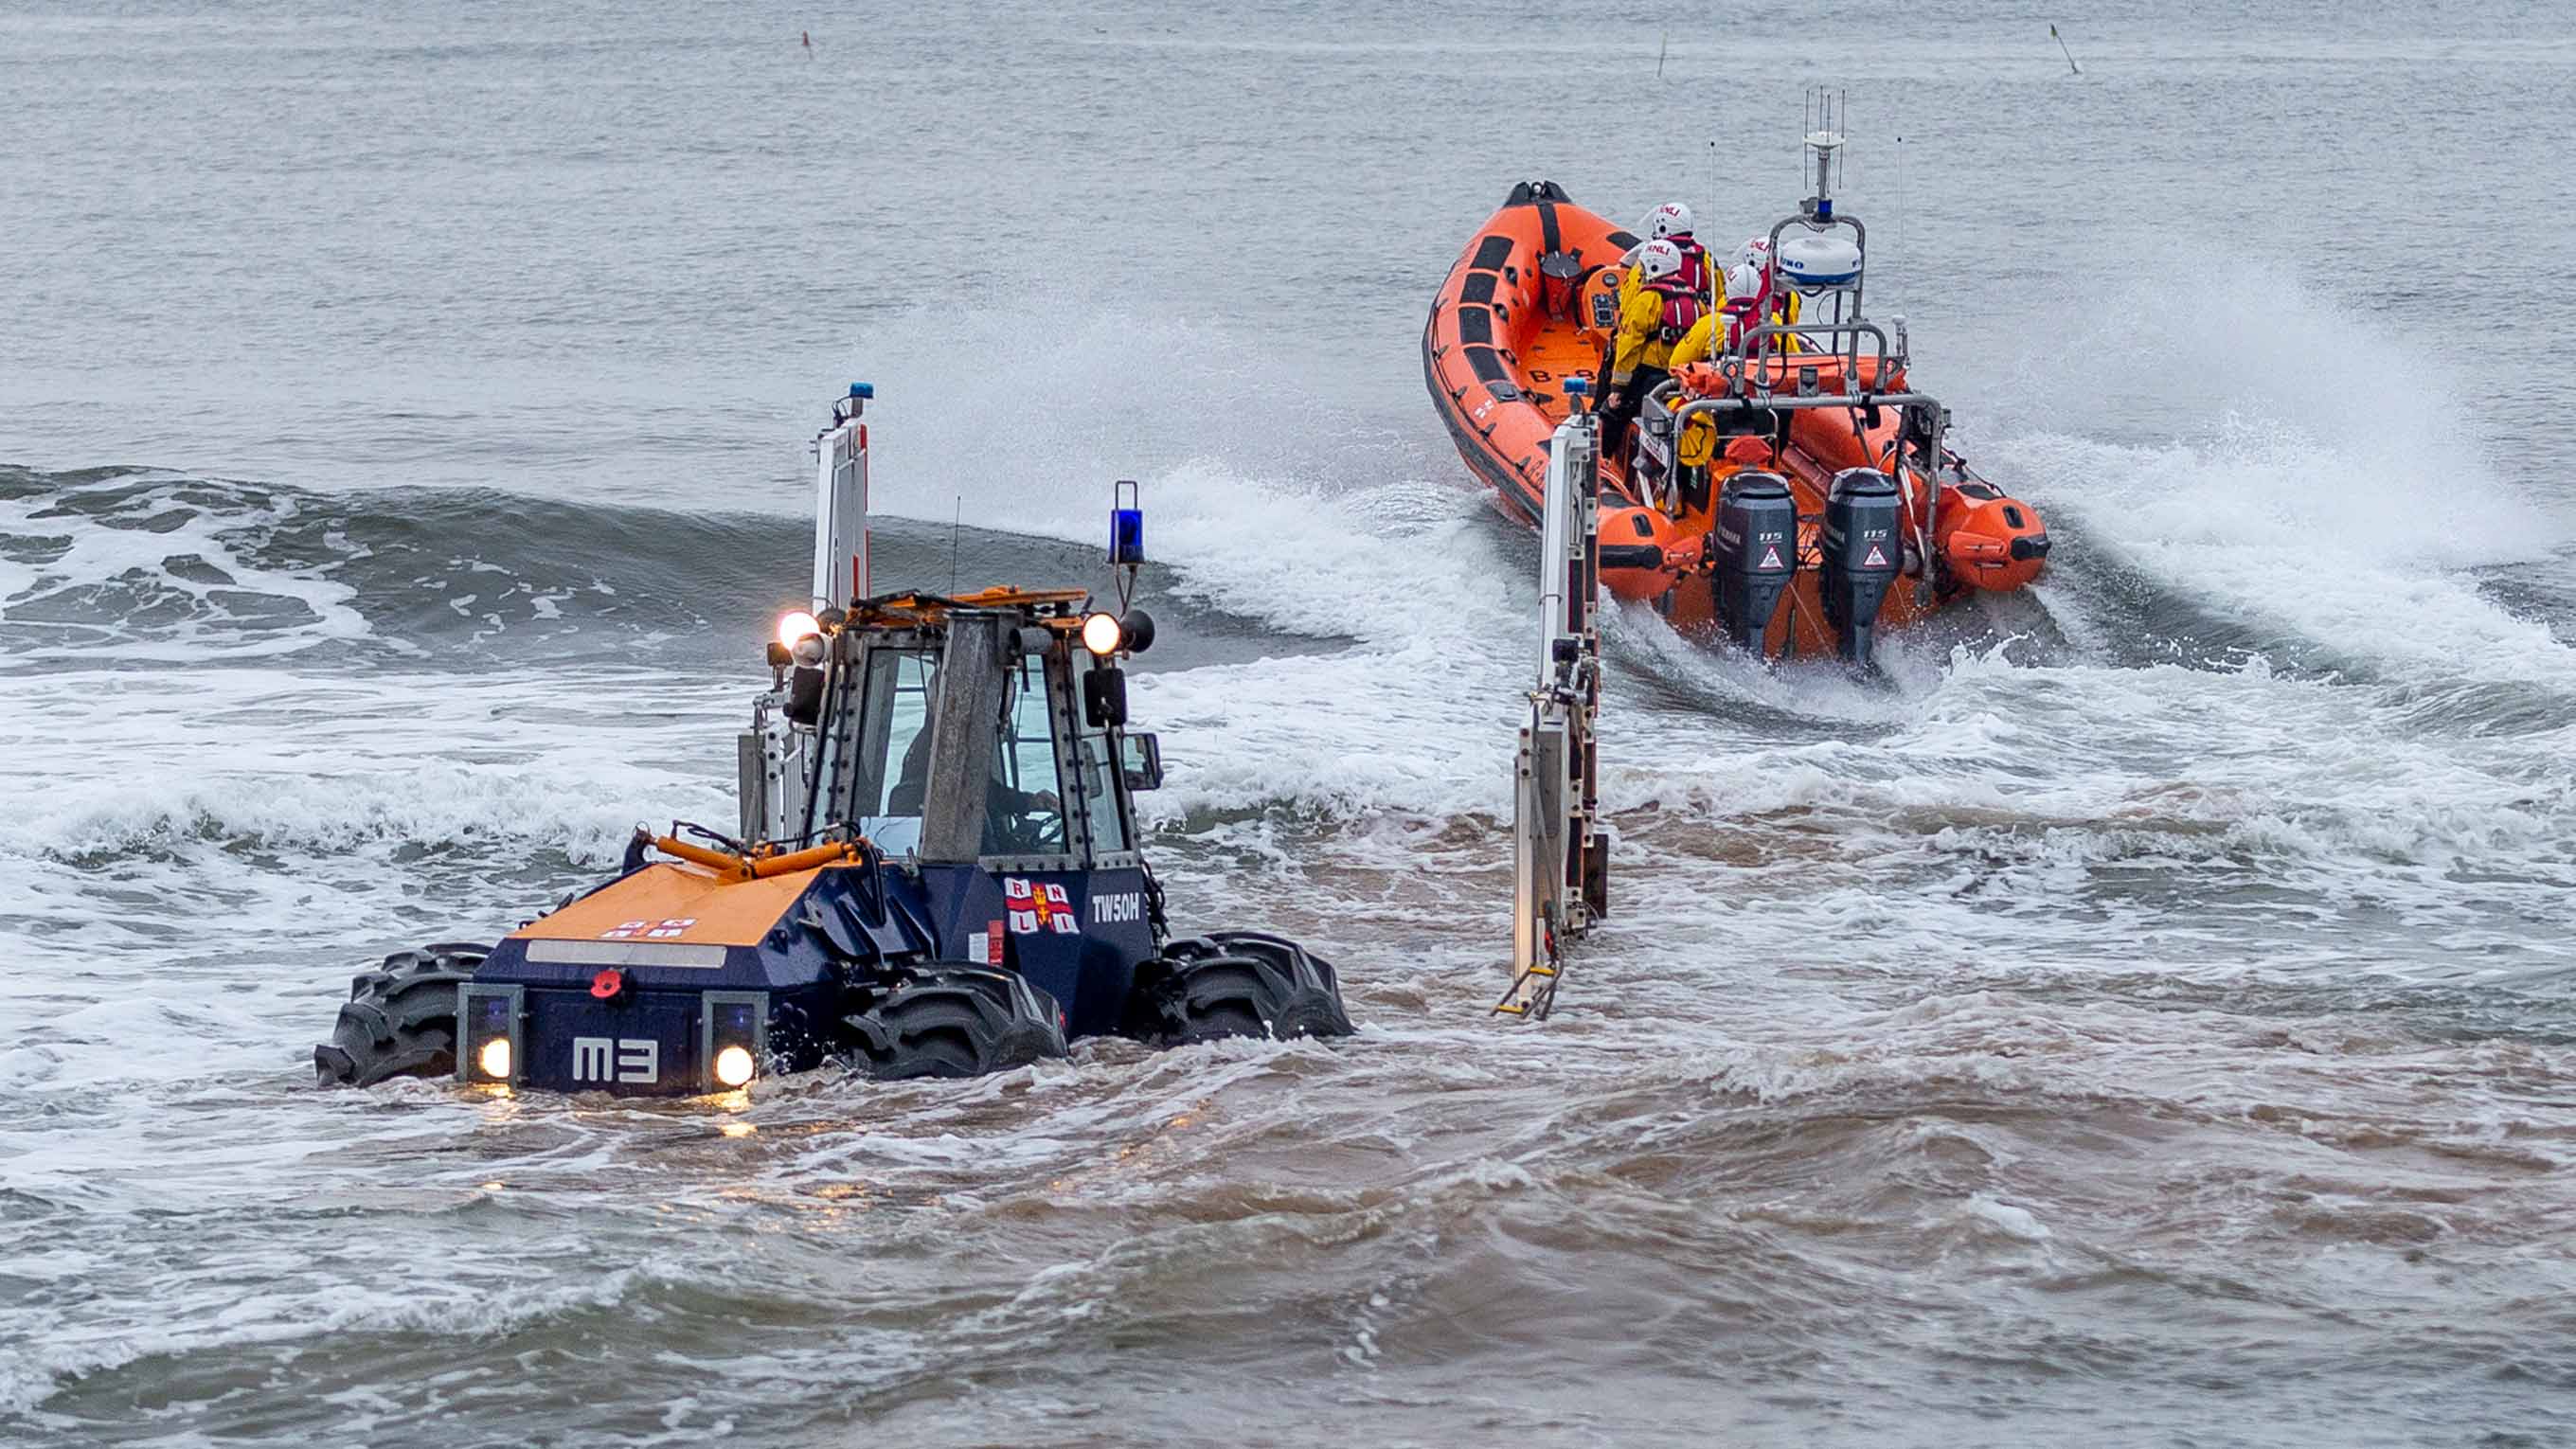 D class inshore lifeboat launches from a tractor into heavy surf